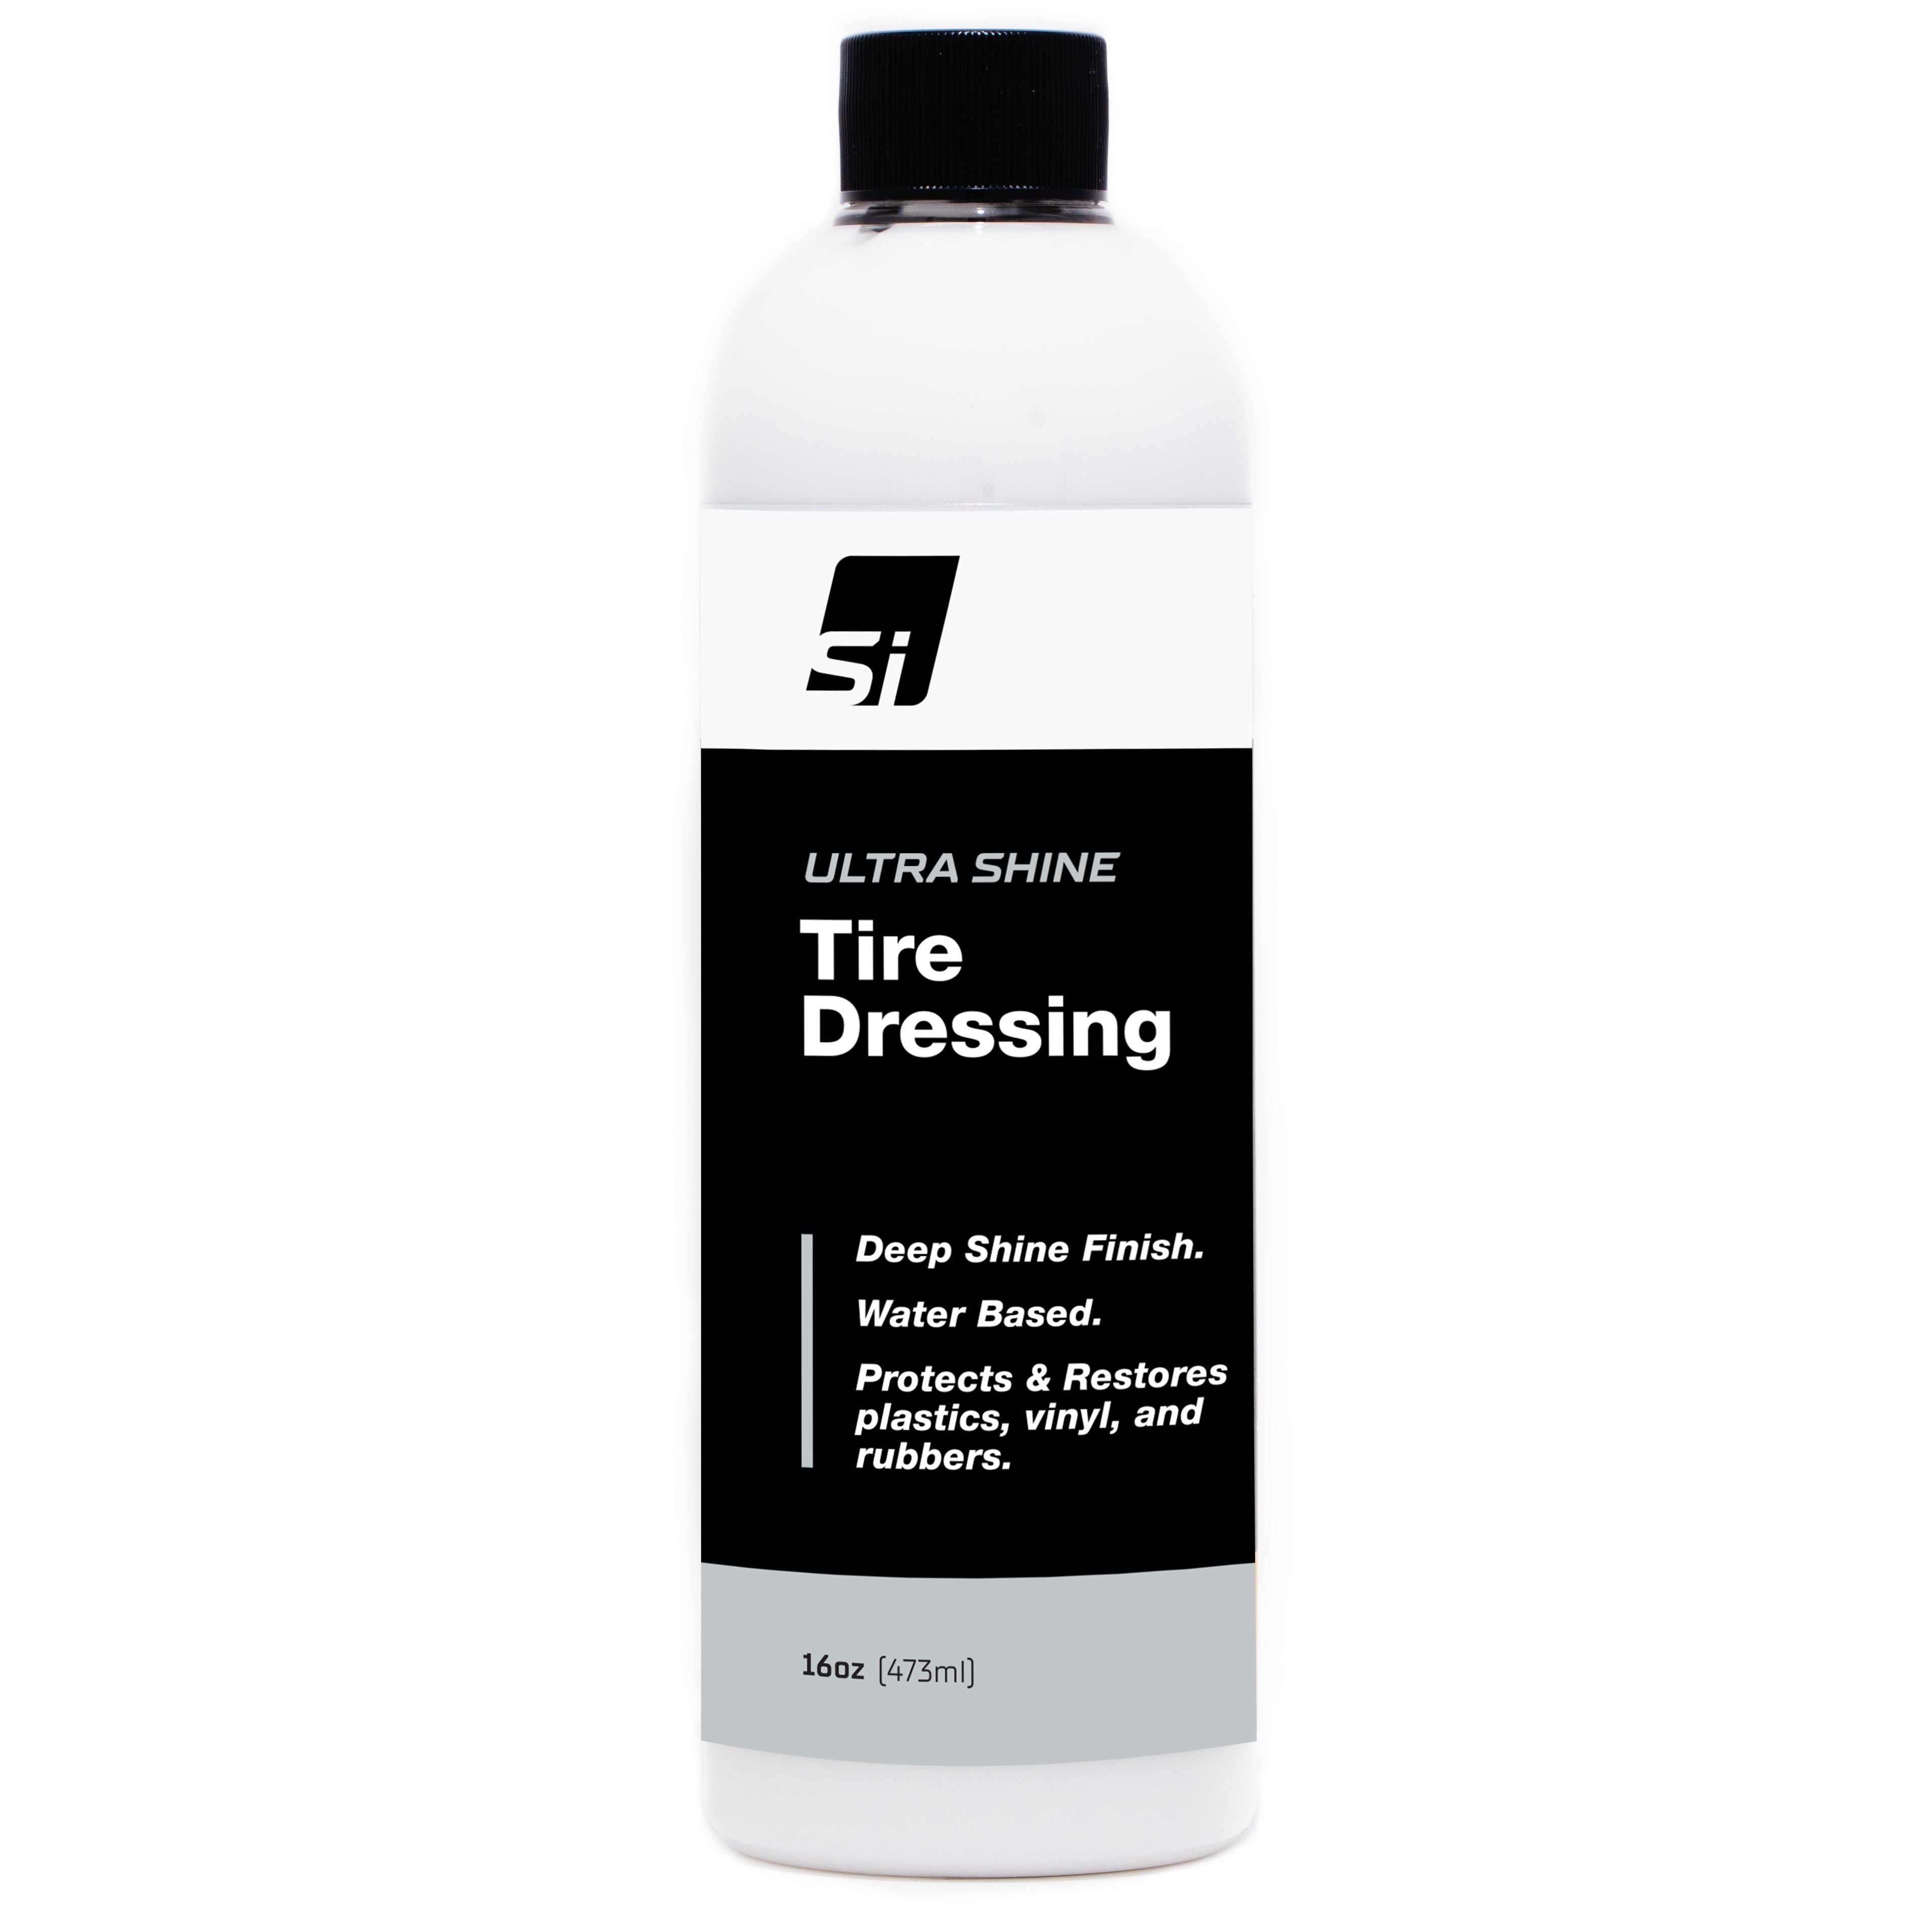 Nexgen Tire Dressing — Water Based Tire Protector — Easily Remove Dirt and Restore Original Shine - H20 Based - 16 oz